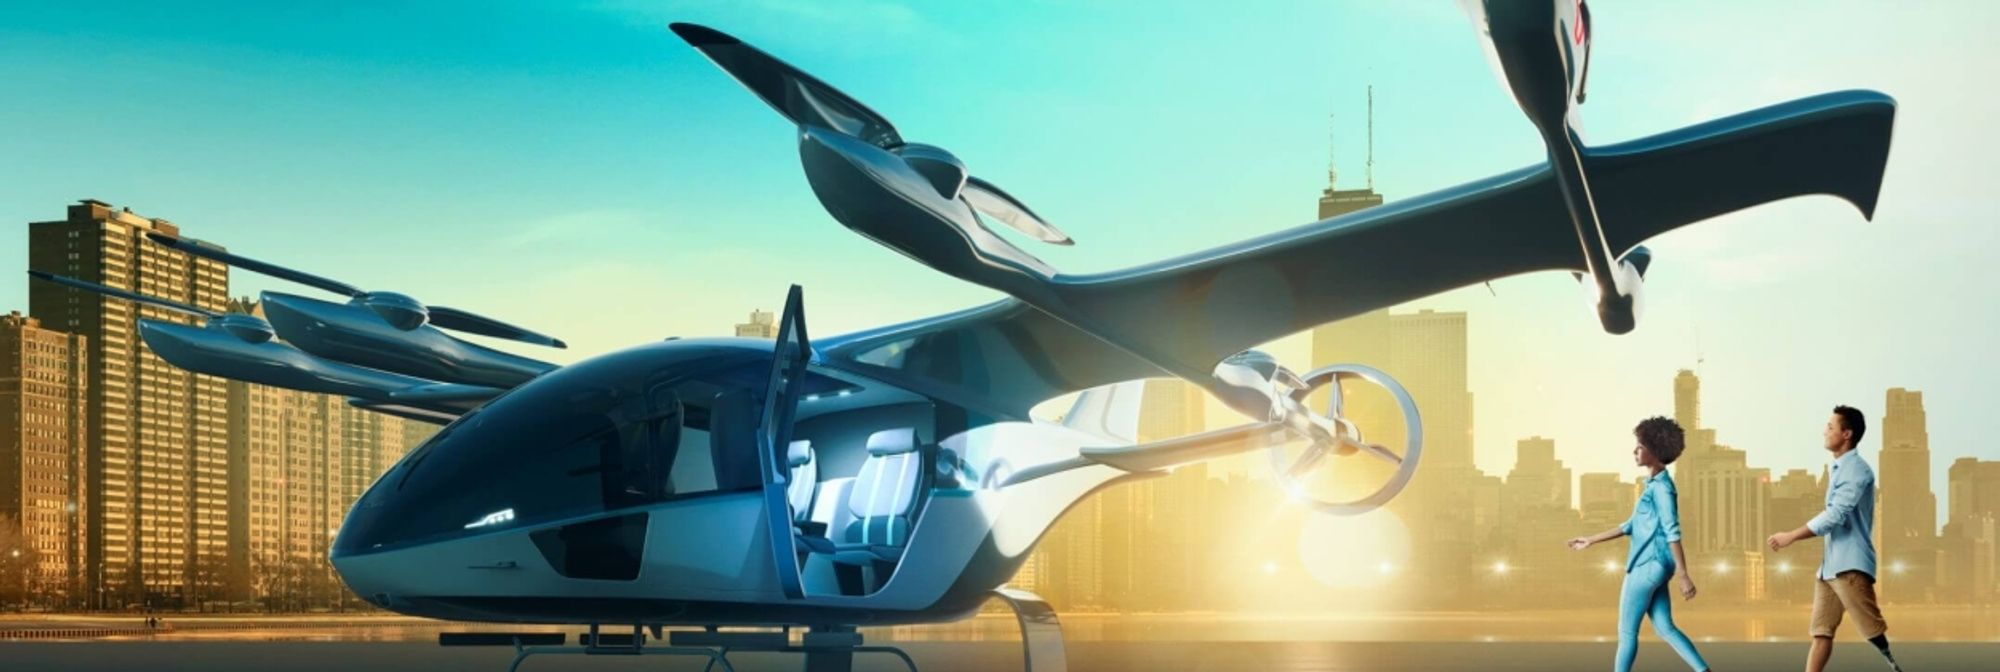 Eve will use helicopters to mimic flying taxis in Chicago